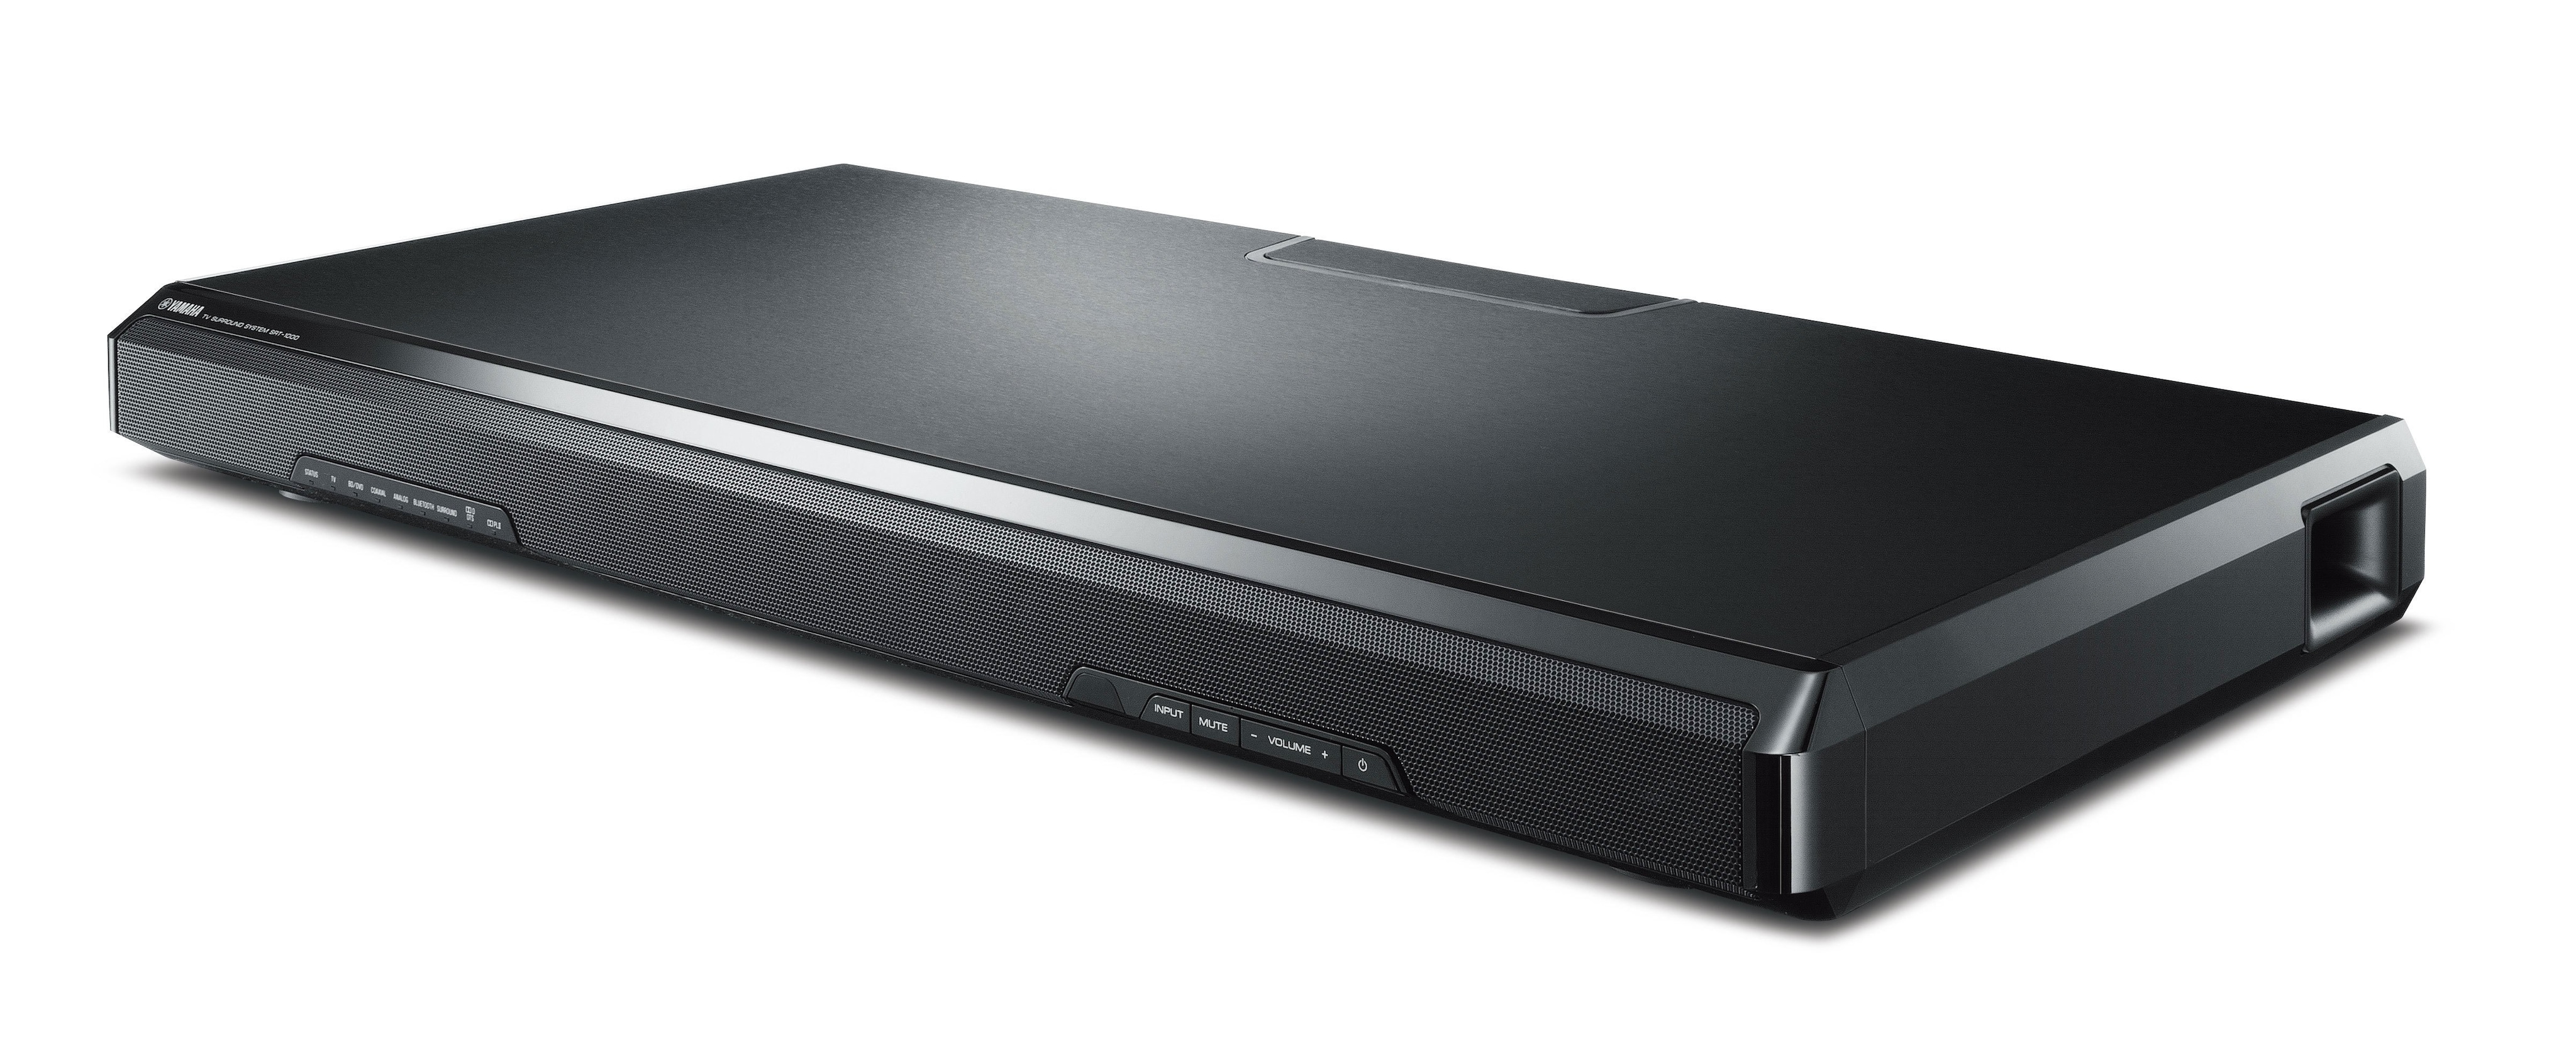 SRT-1000 - Overview - Sound Bar - Audio & Visual - Products 